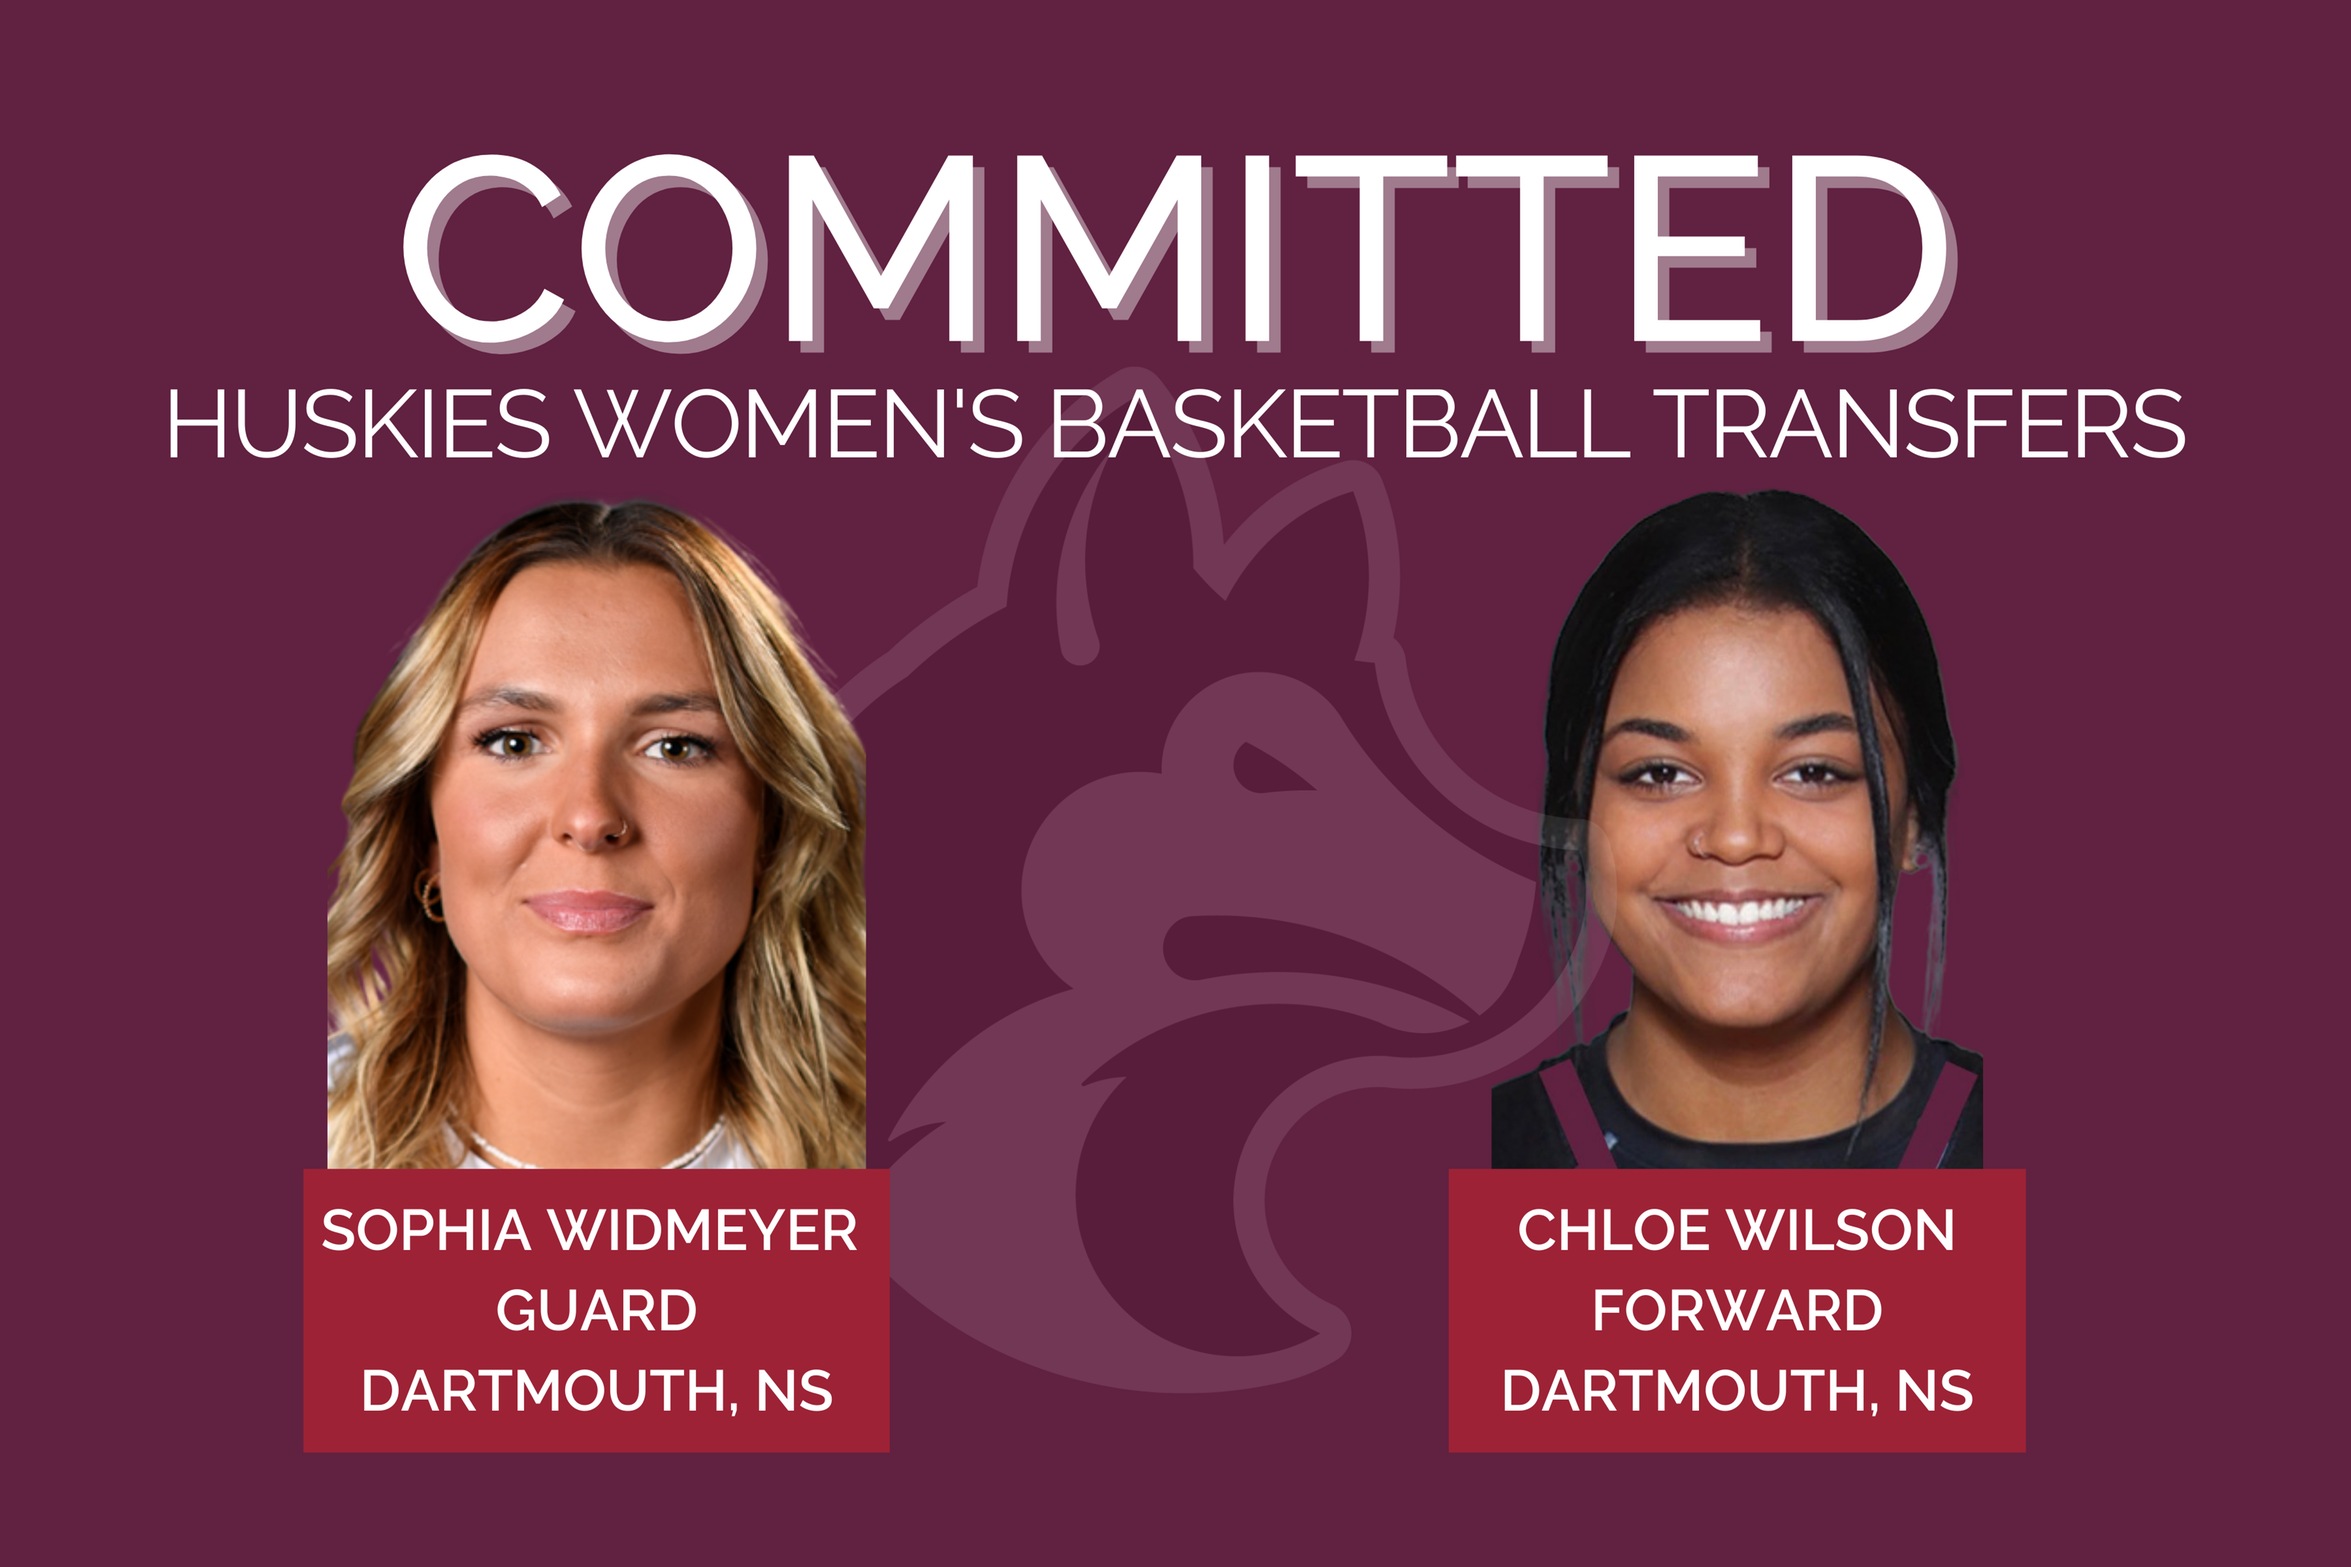 Huskies women's basketball announces commitment of two local transfers